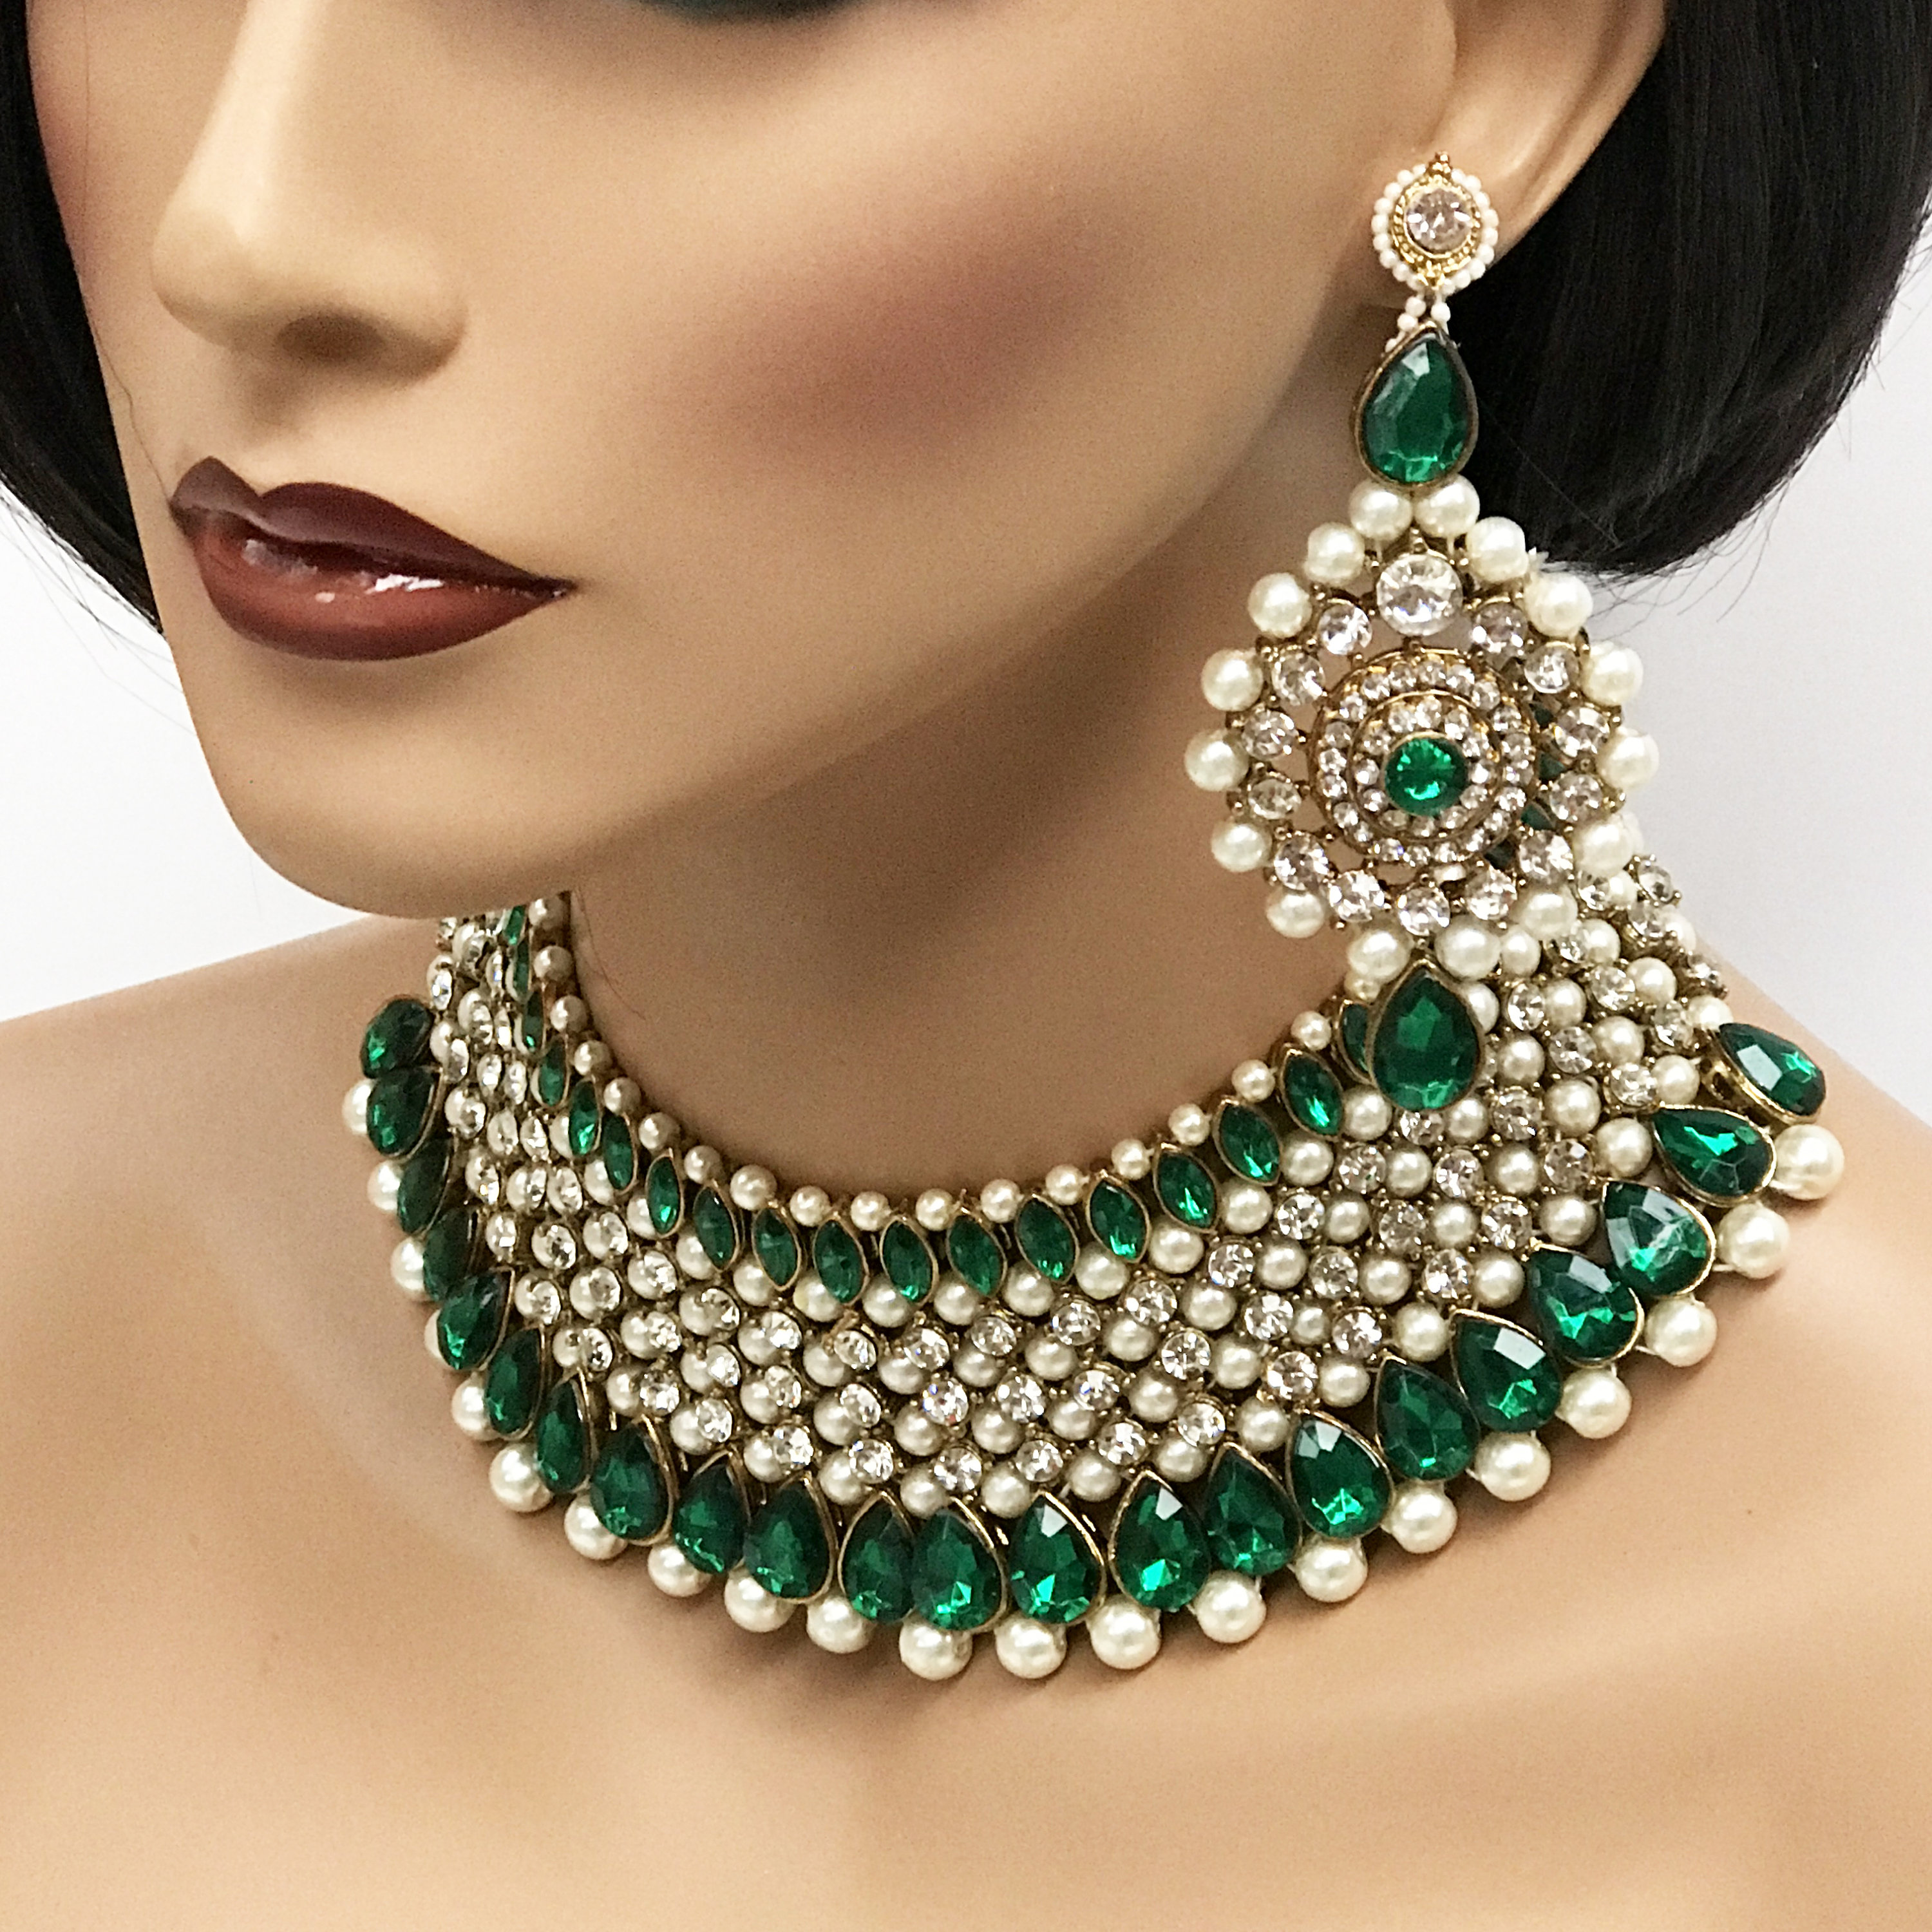 Indian Bollywood Antique Green Necklace Jhumka Earrings Wedding Jewelry 